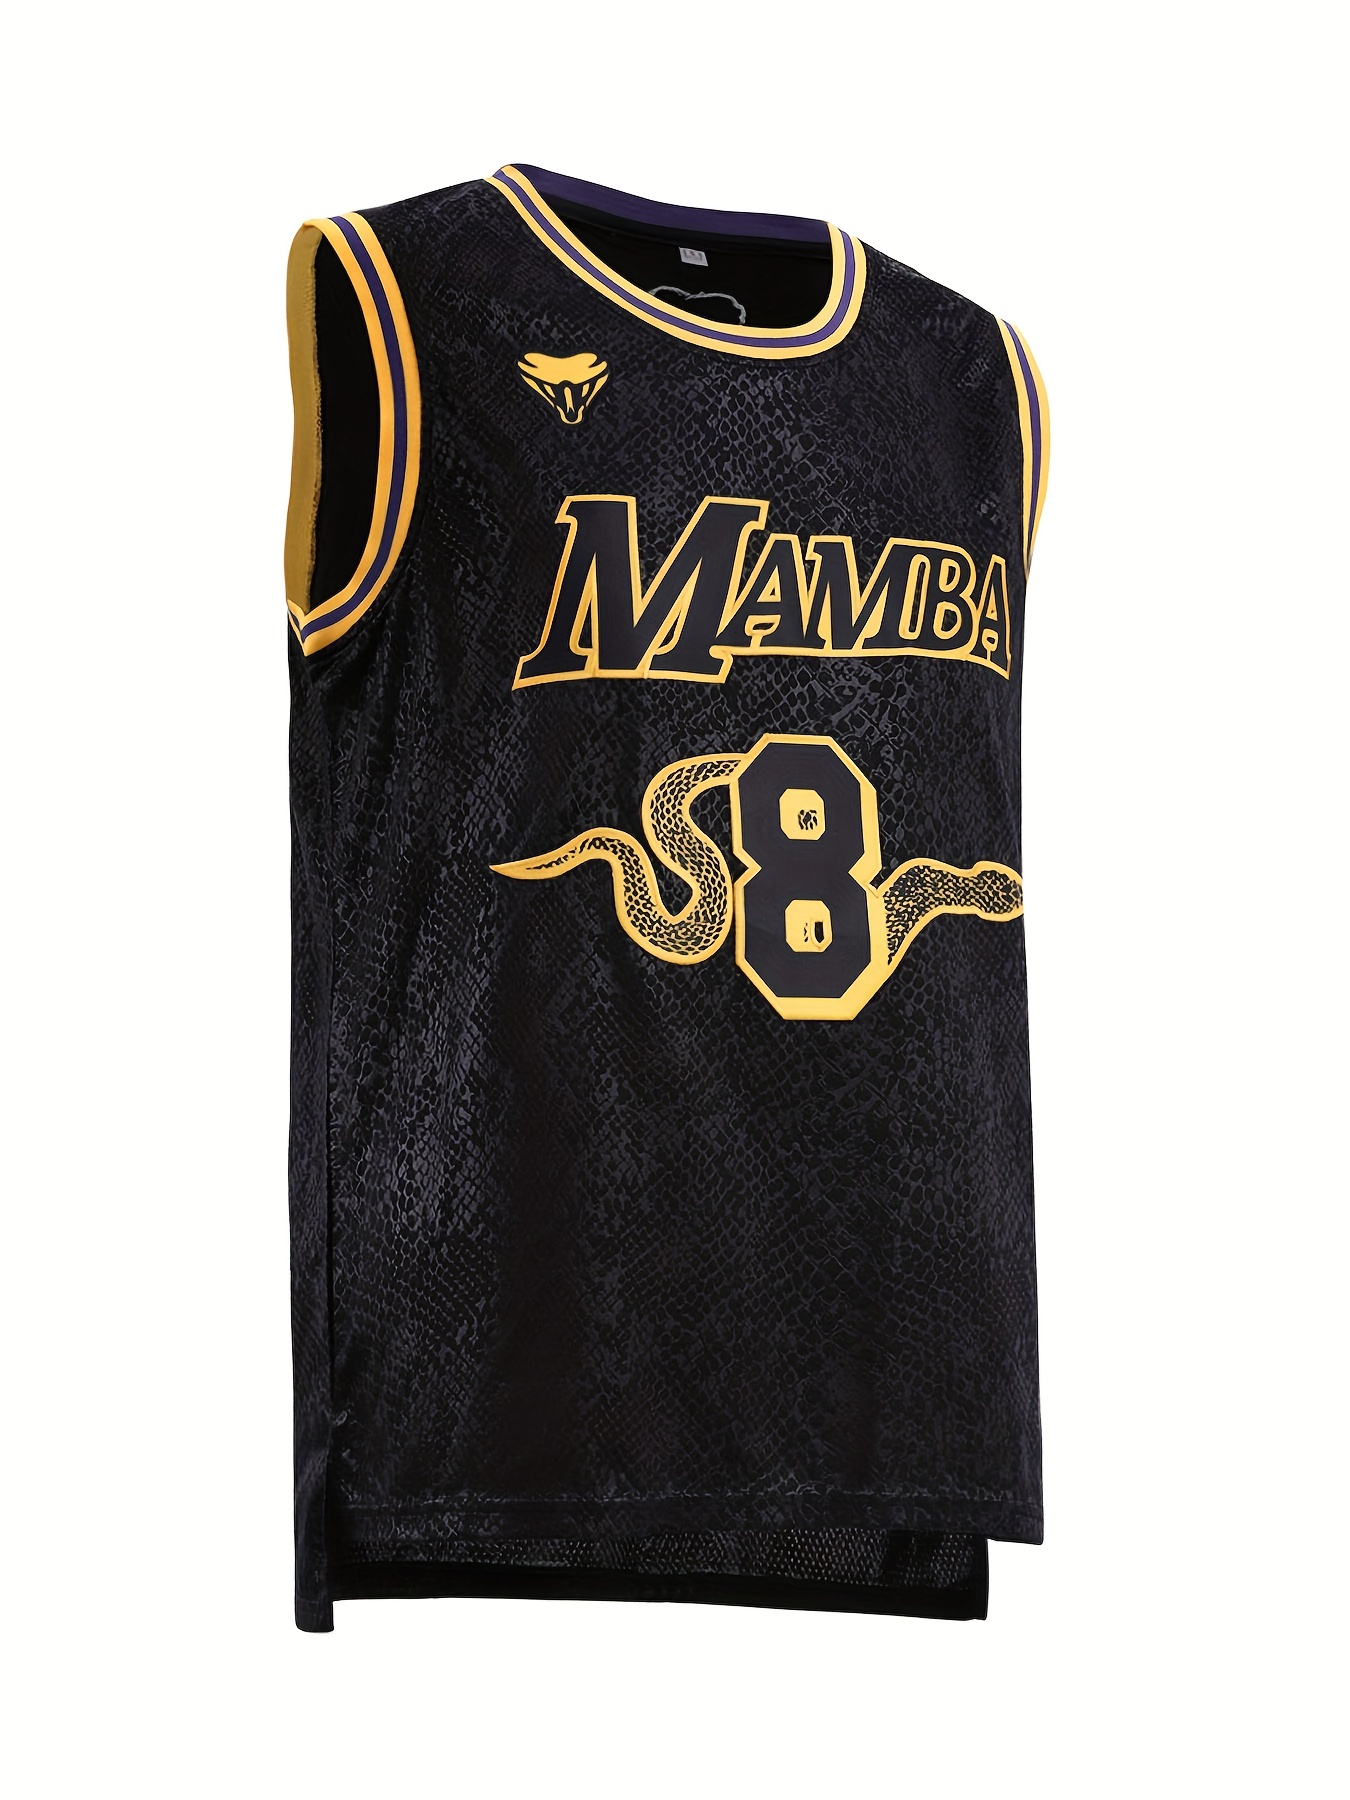 Men's Black Basketball Jersey, Front #8 Back #24 Embroidered, Men's Casual Fashion Jersey Size S-XXXL,Temu